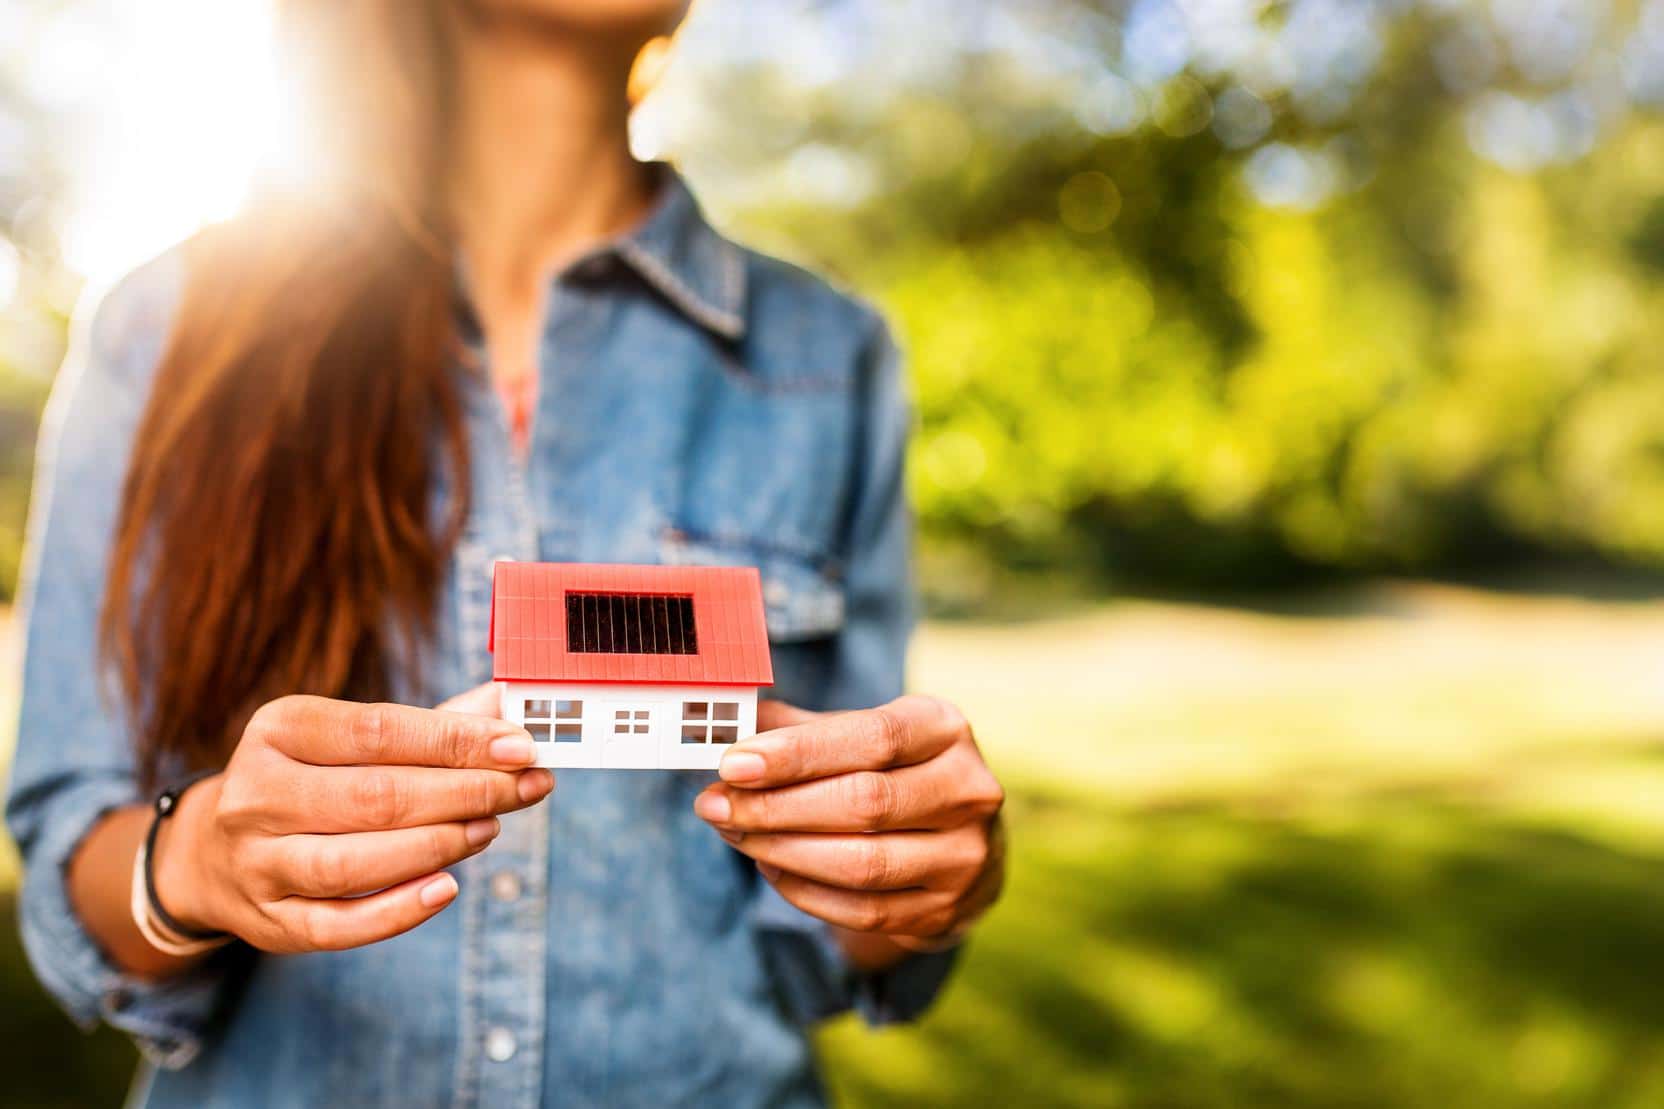 Woman presenting a model of a toy house with solar cells and a sunlit lawn behind her